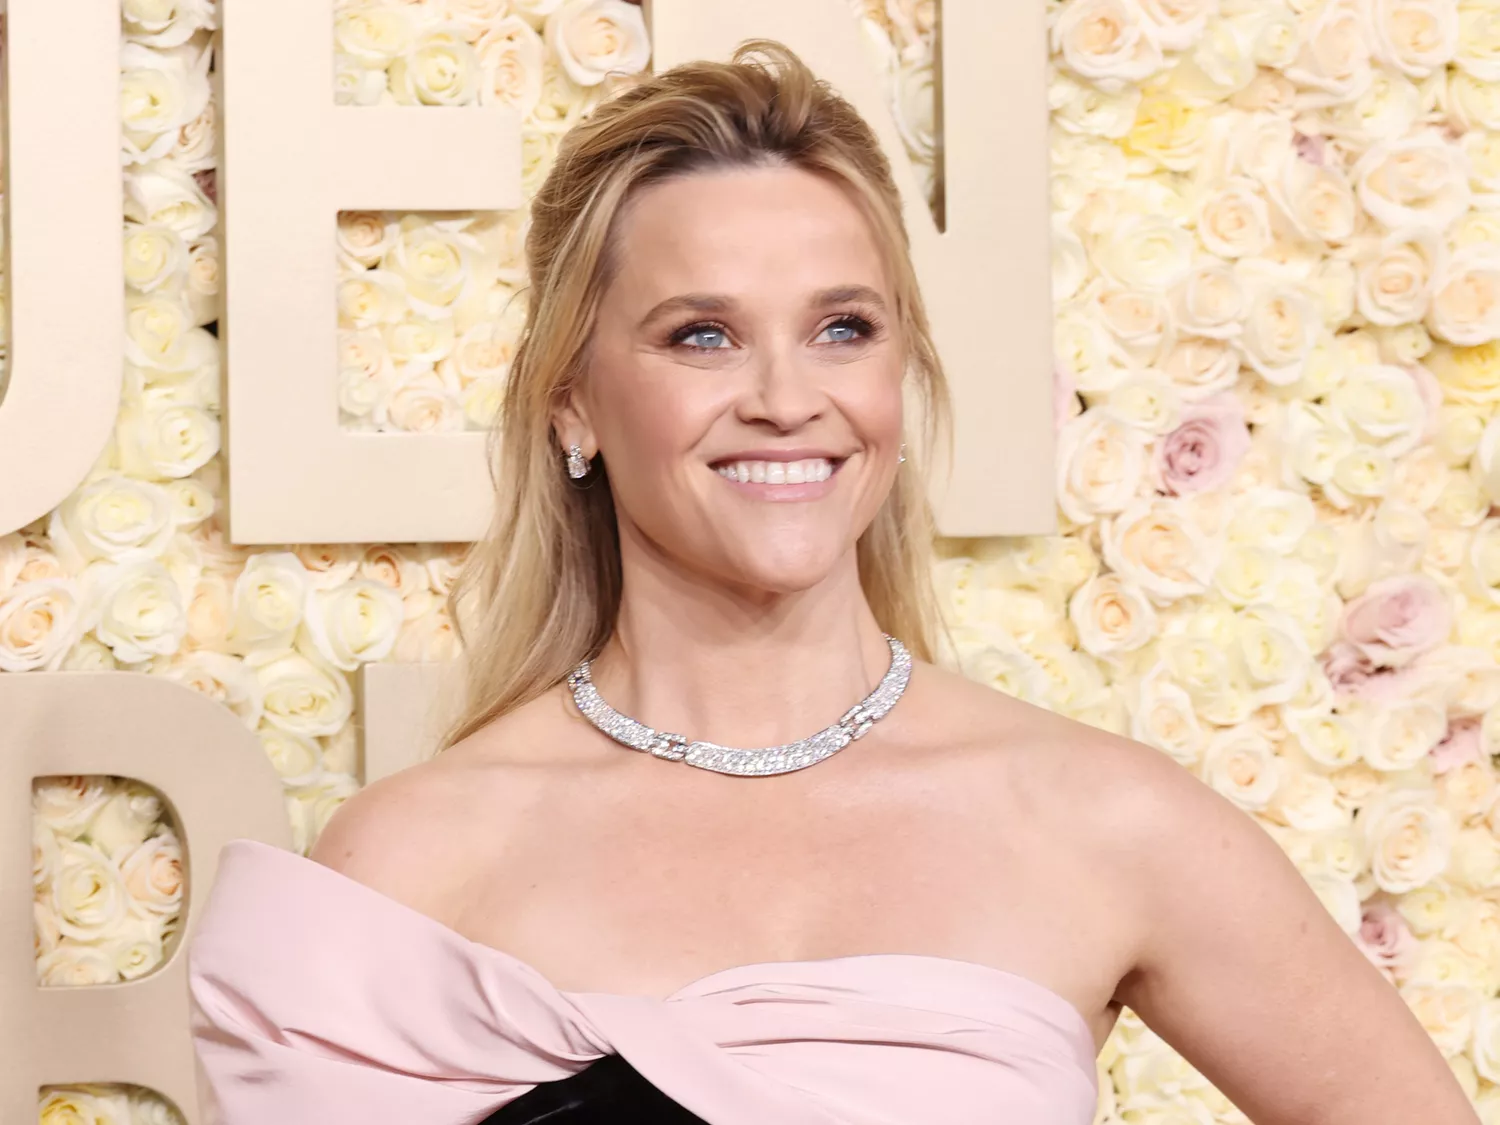 Reese Witherspoon Just Wore My Favorite Firming Skin Tint From a Jennifer Garner-Loved Brand